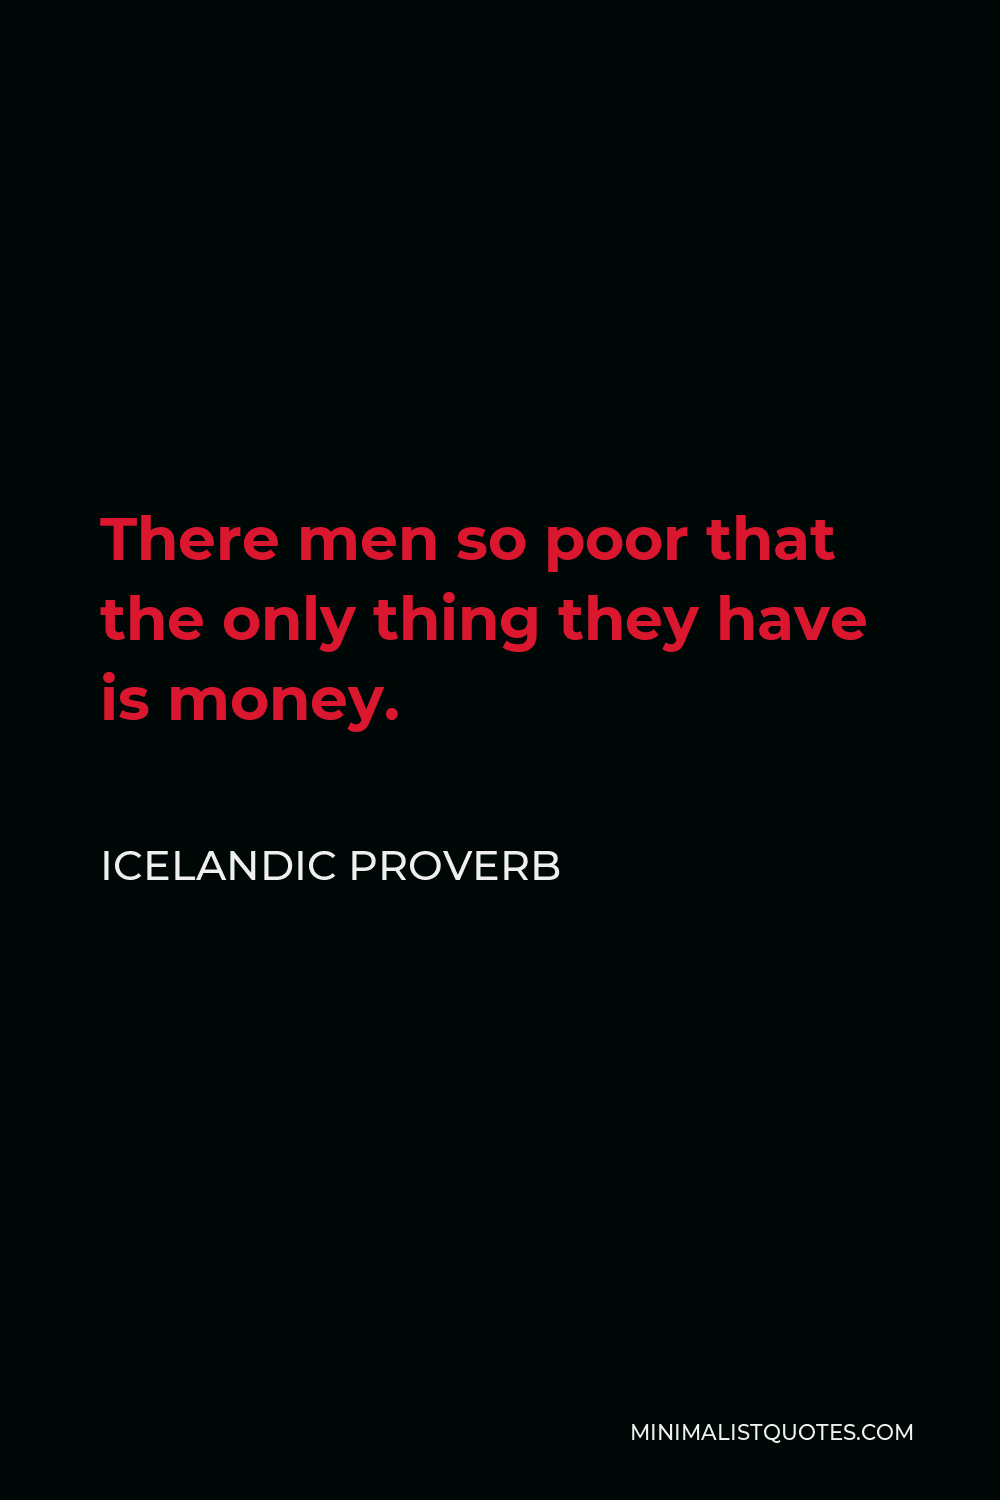 Icelandic Proverb Quote - There men so poor that the only thing they have is money.